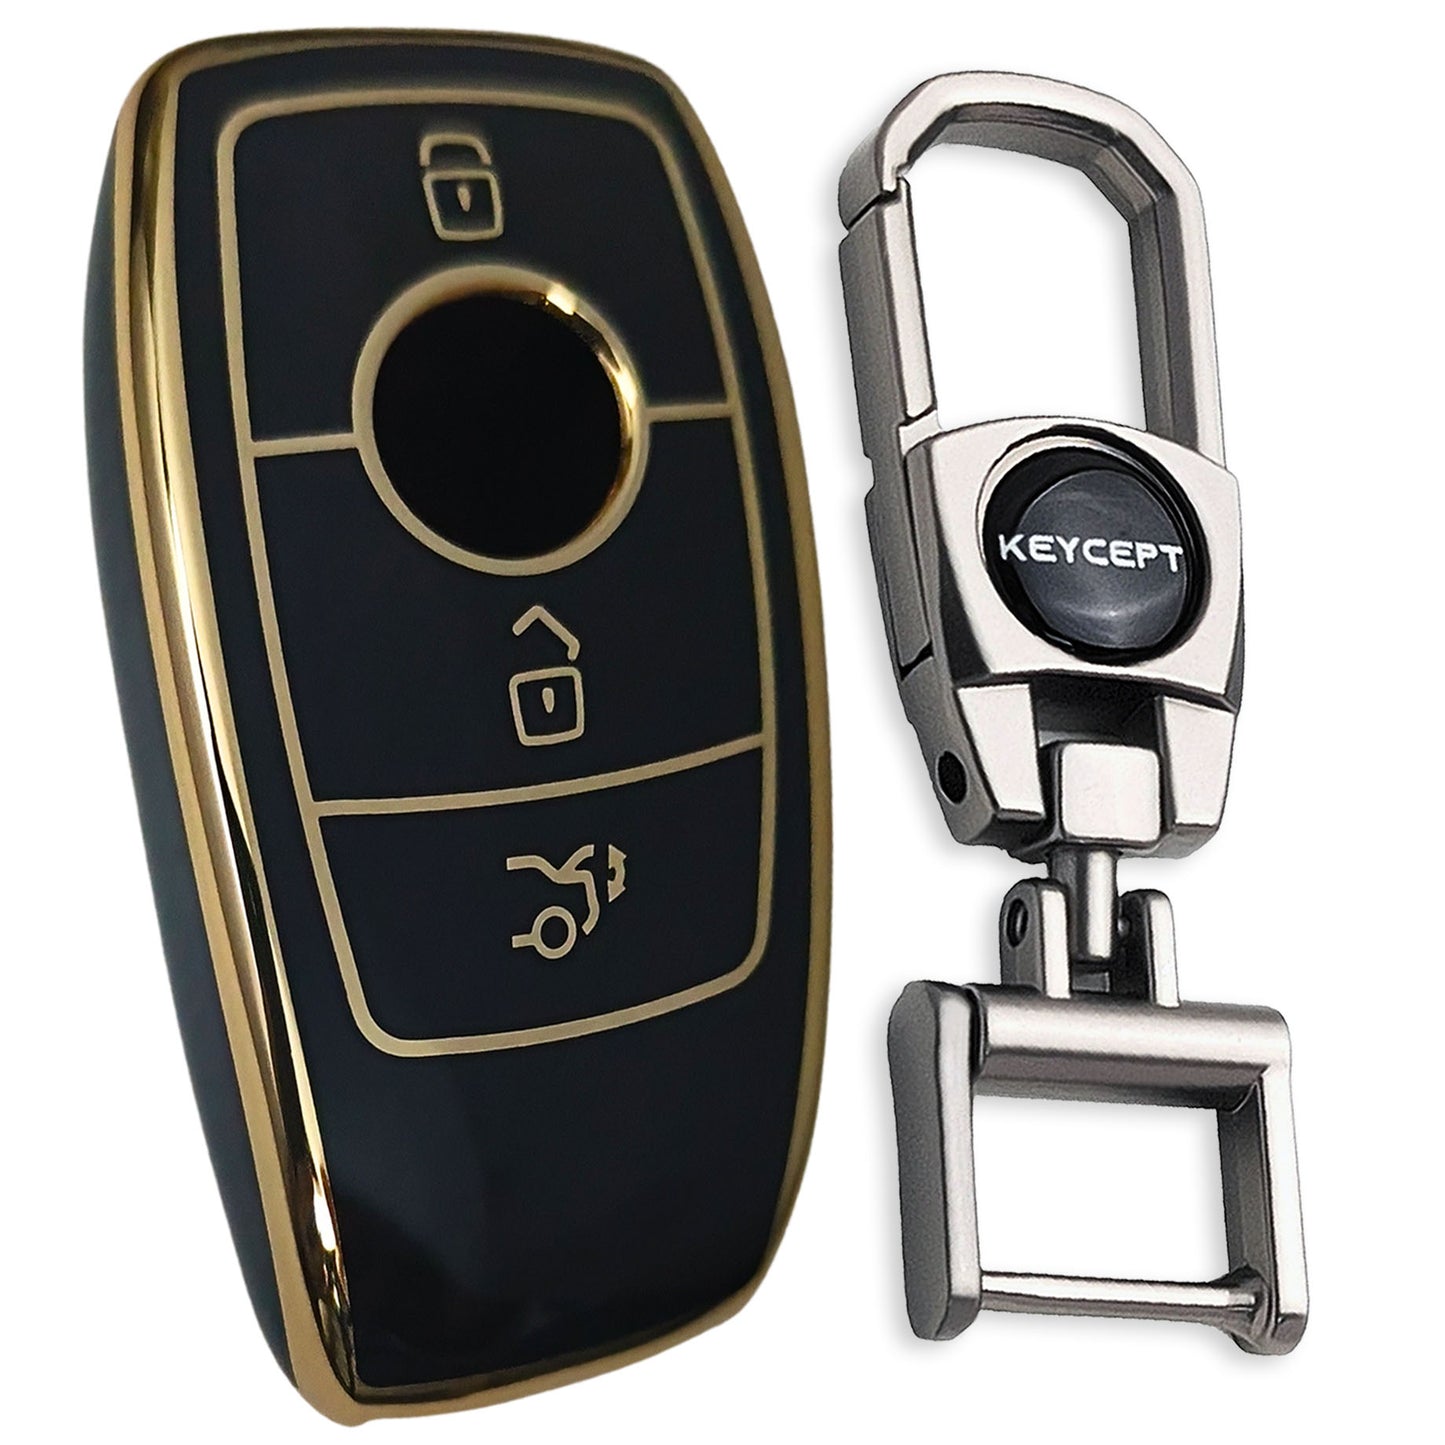 TPU Key Cover Compatible for Benz E series 3 Button Smart Key with Keychain 2